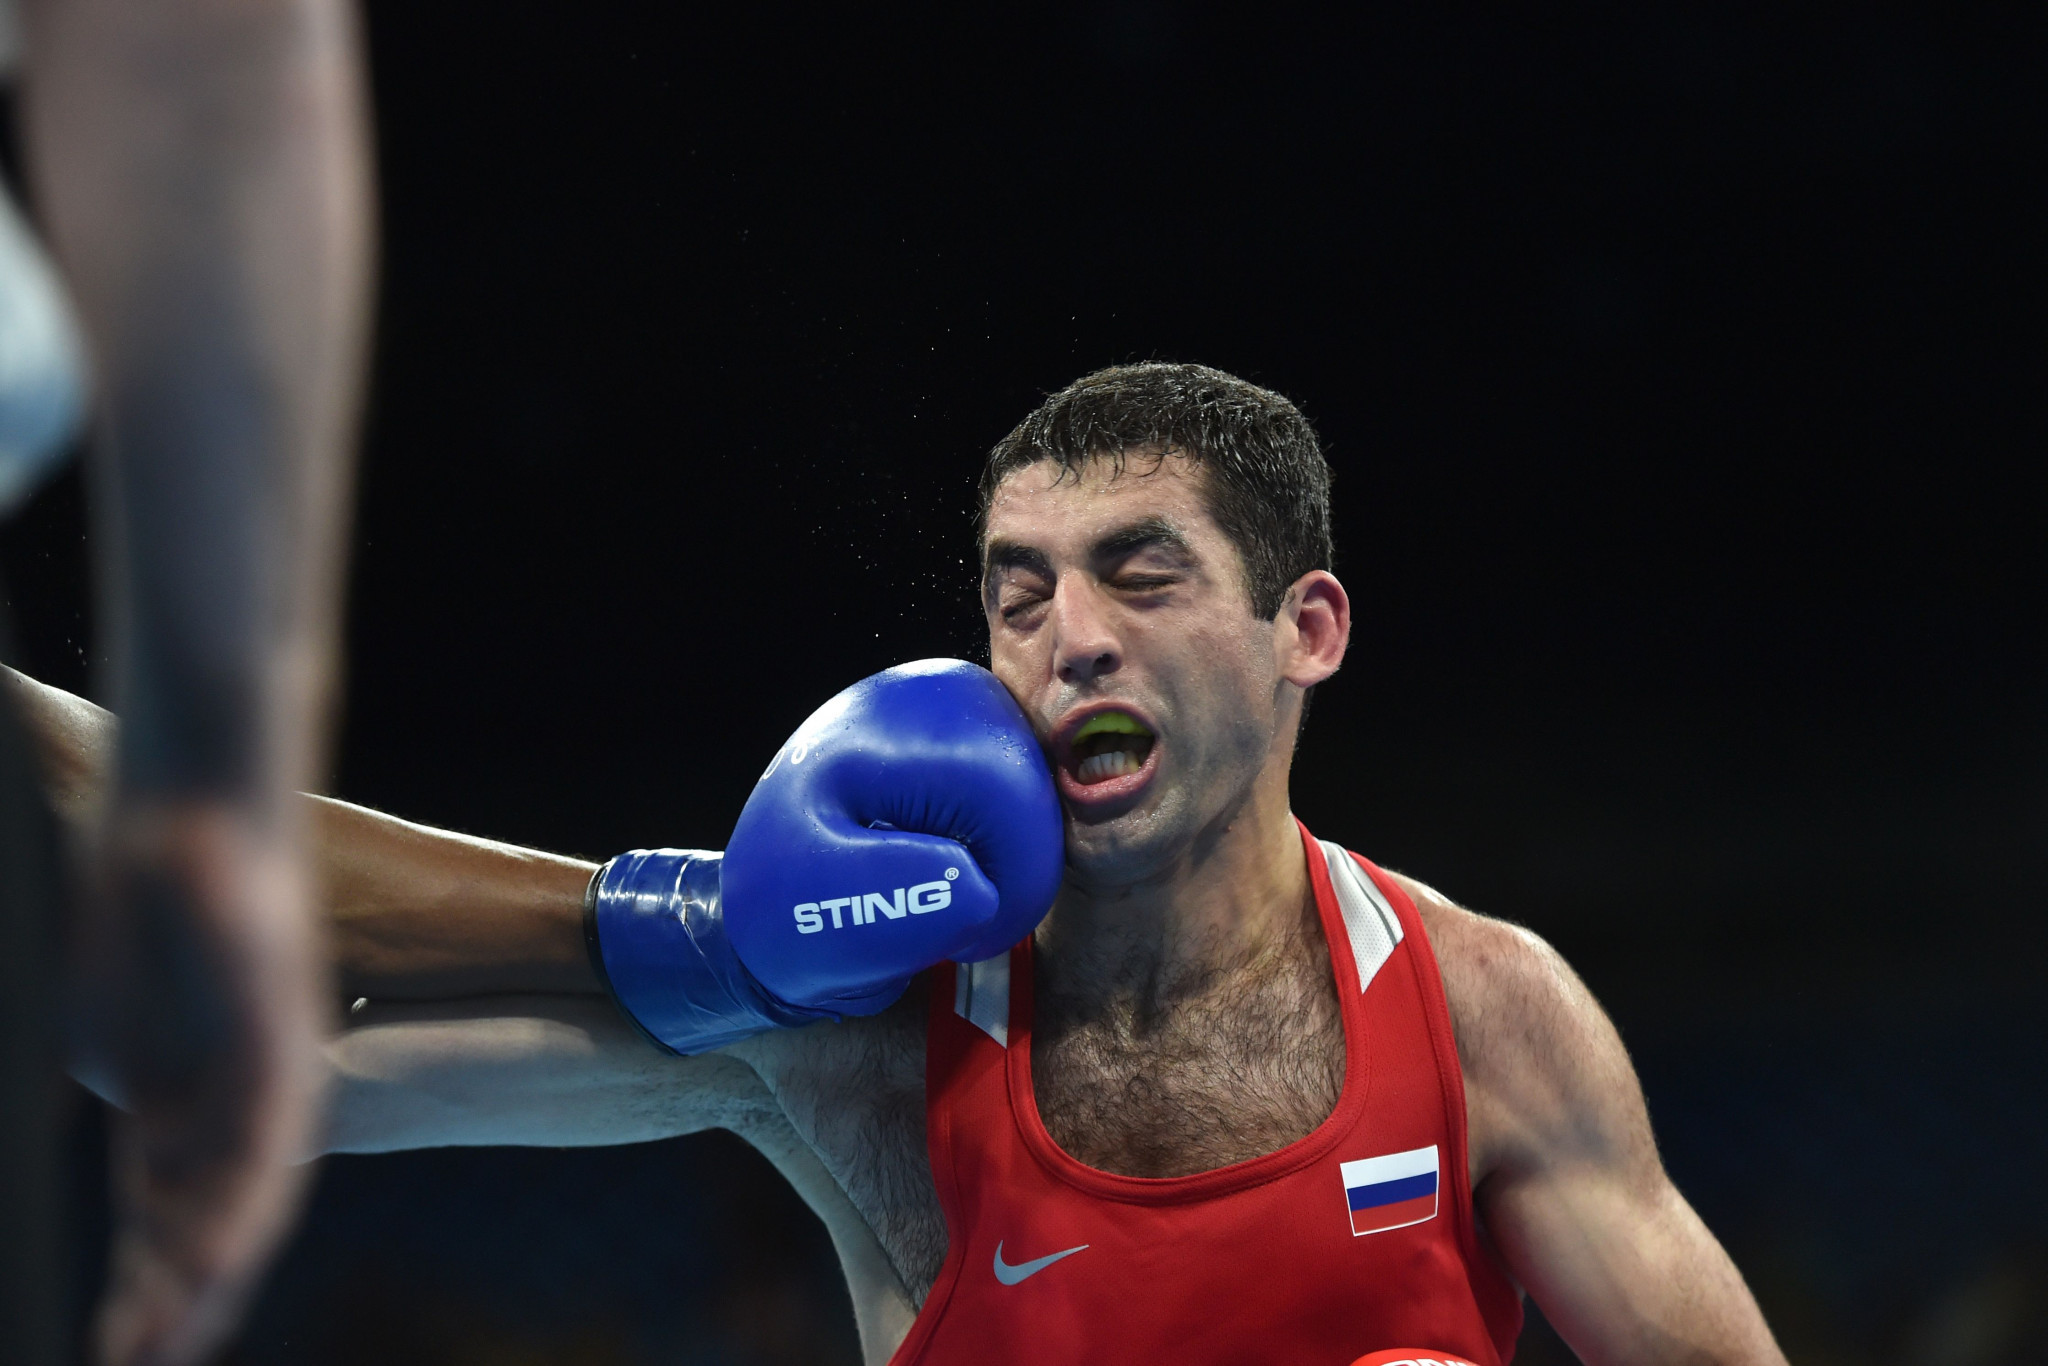 Van der Vorst criticises International Boxing Association decision to allow Russian and Belarusian boxers back to competition